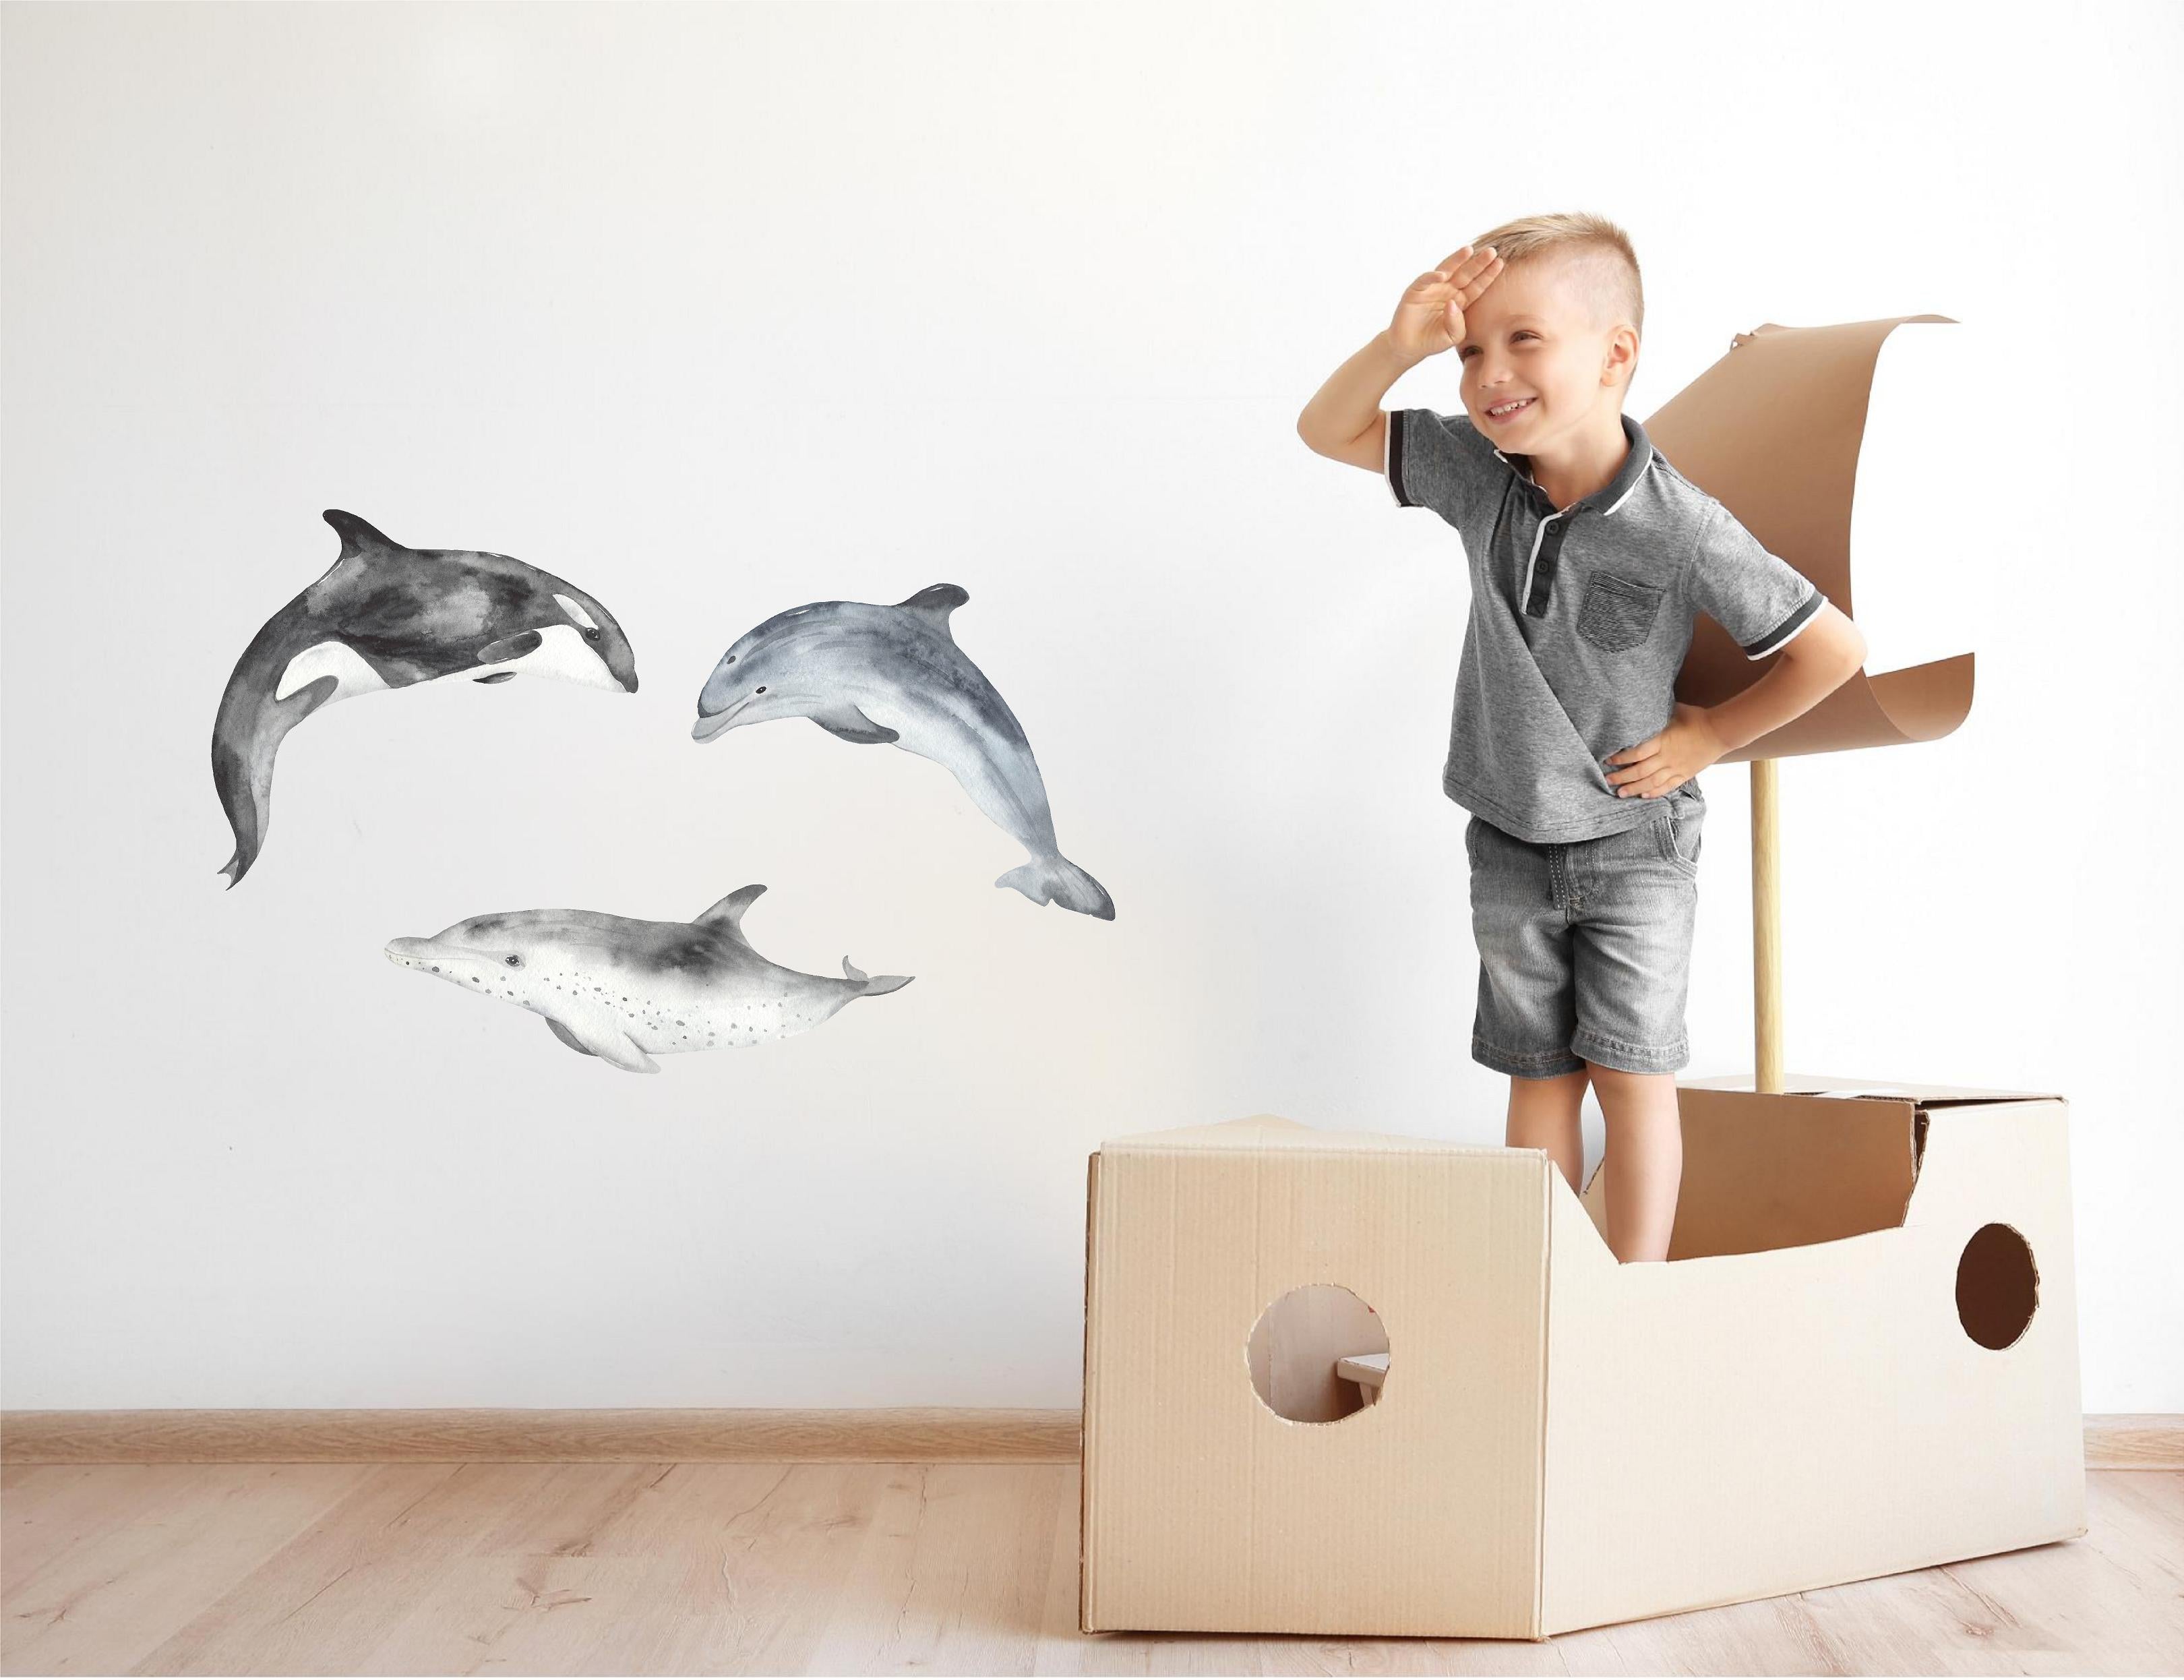 Gray Marine Life Set #2 Wall Decal Ocean Sea Life Removable Fabric Wall Sticker | DecalBaby